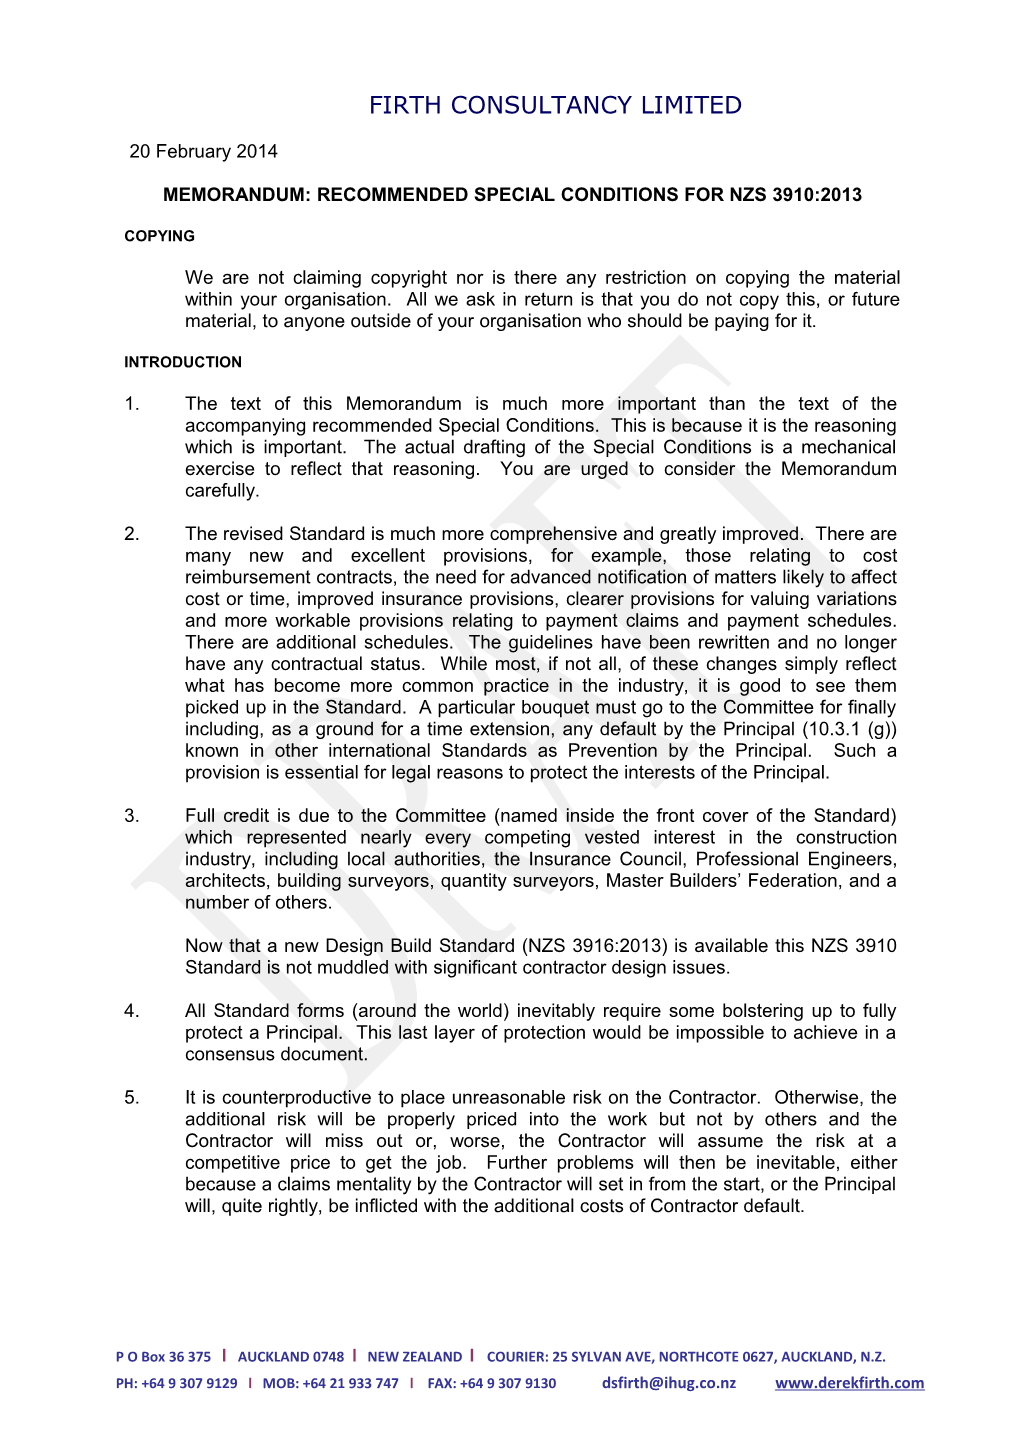 Memorandum: Recommended Special Conditions for Nzs 3910:2013